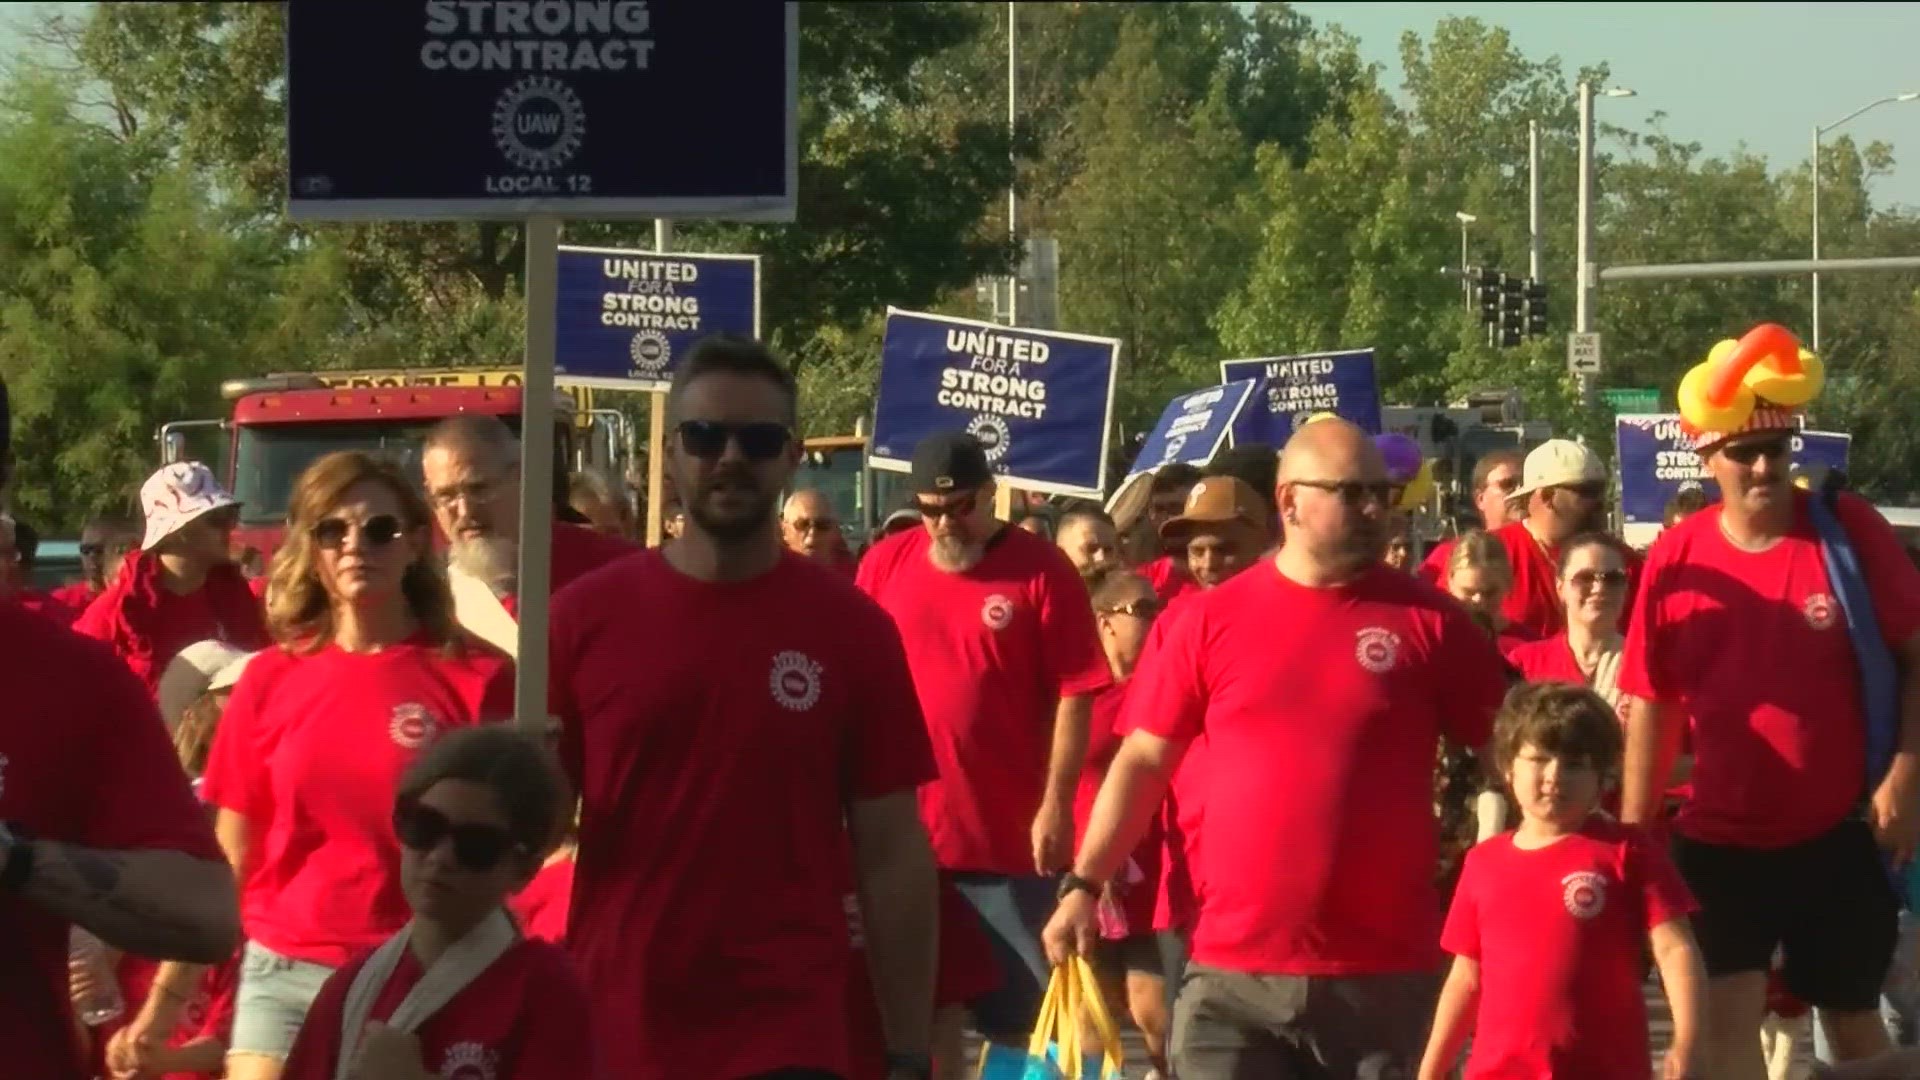 With a growing likelihood of a potential strike, UAW members engaged in Labor Day events to honor American workers.